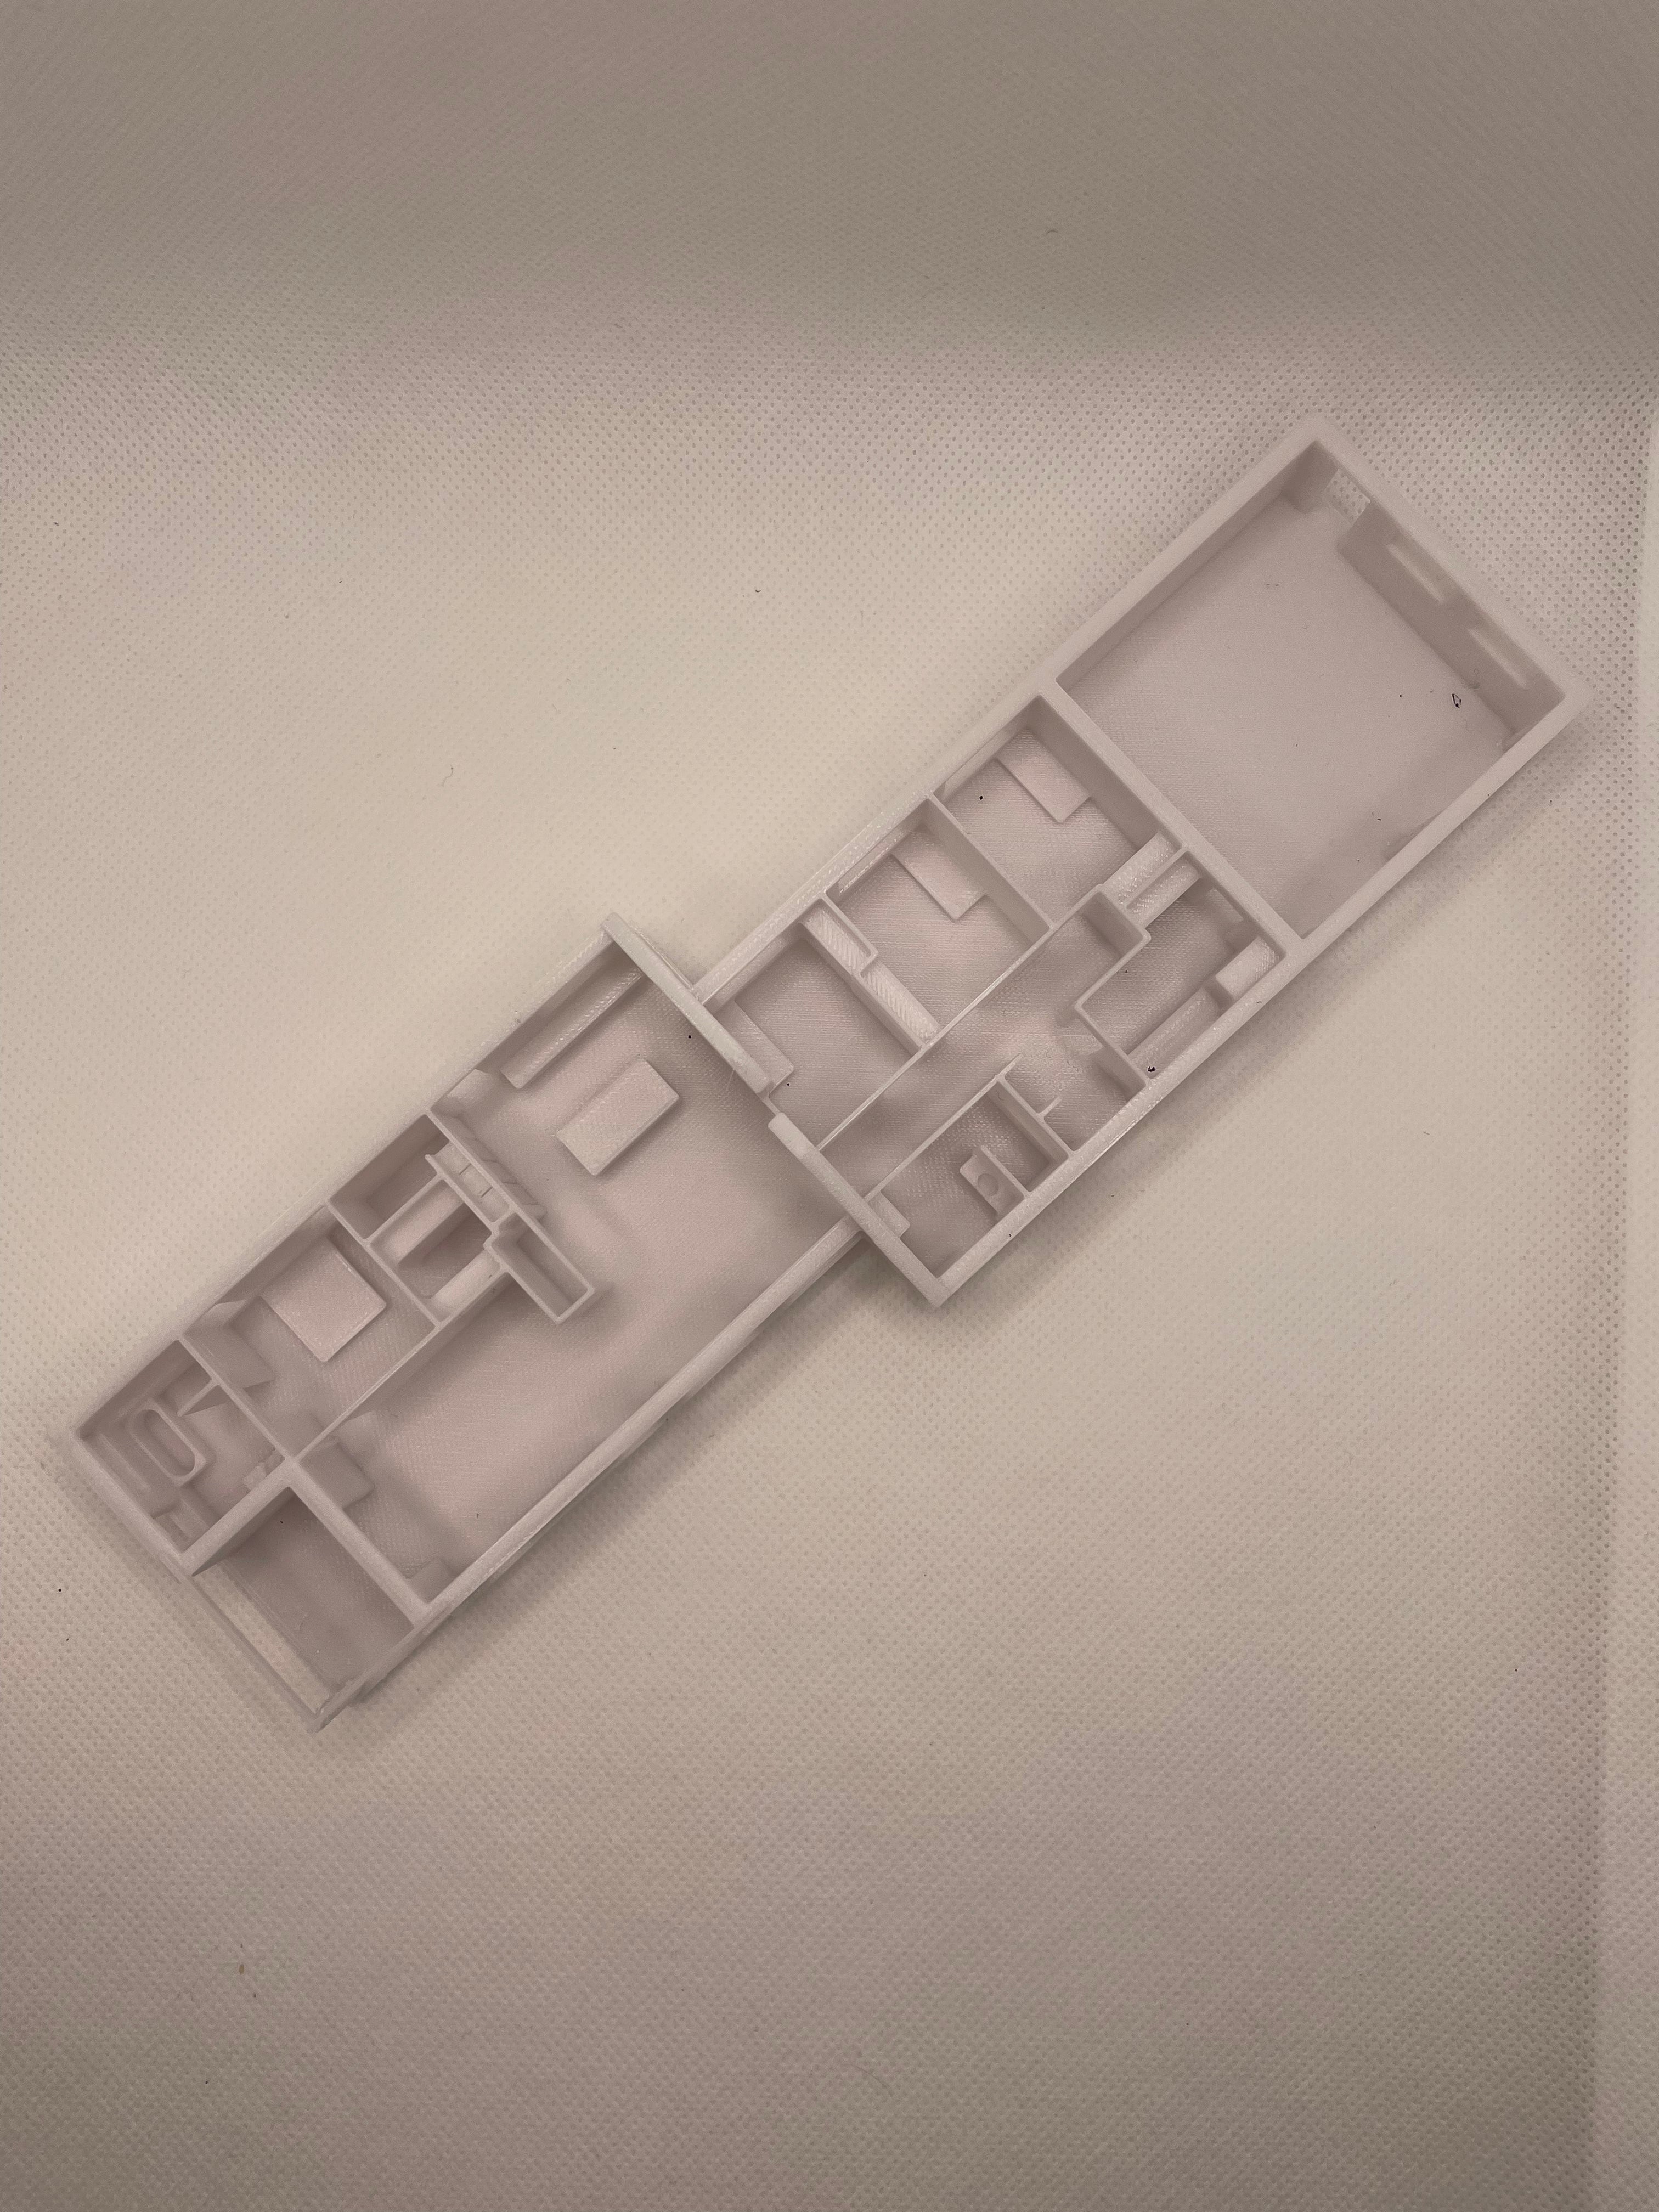 3D Printed house from floor plan